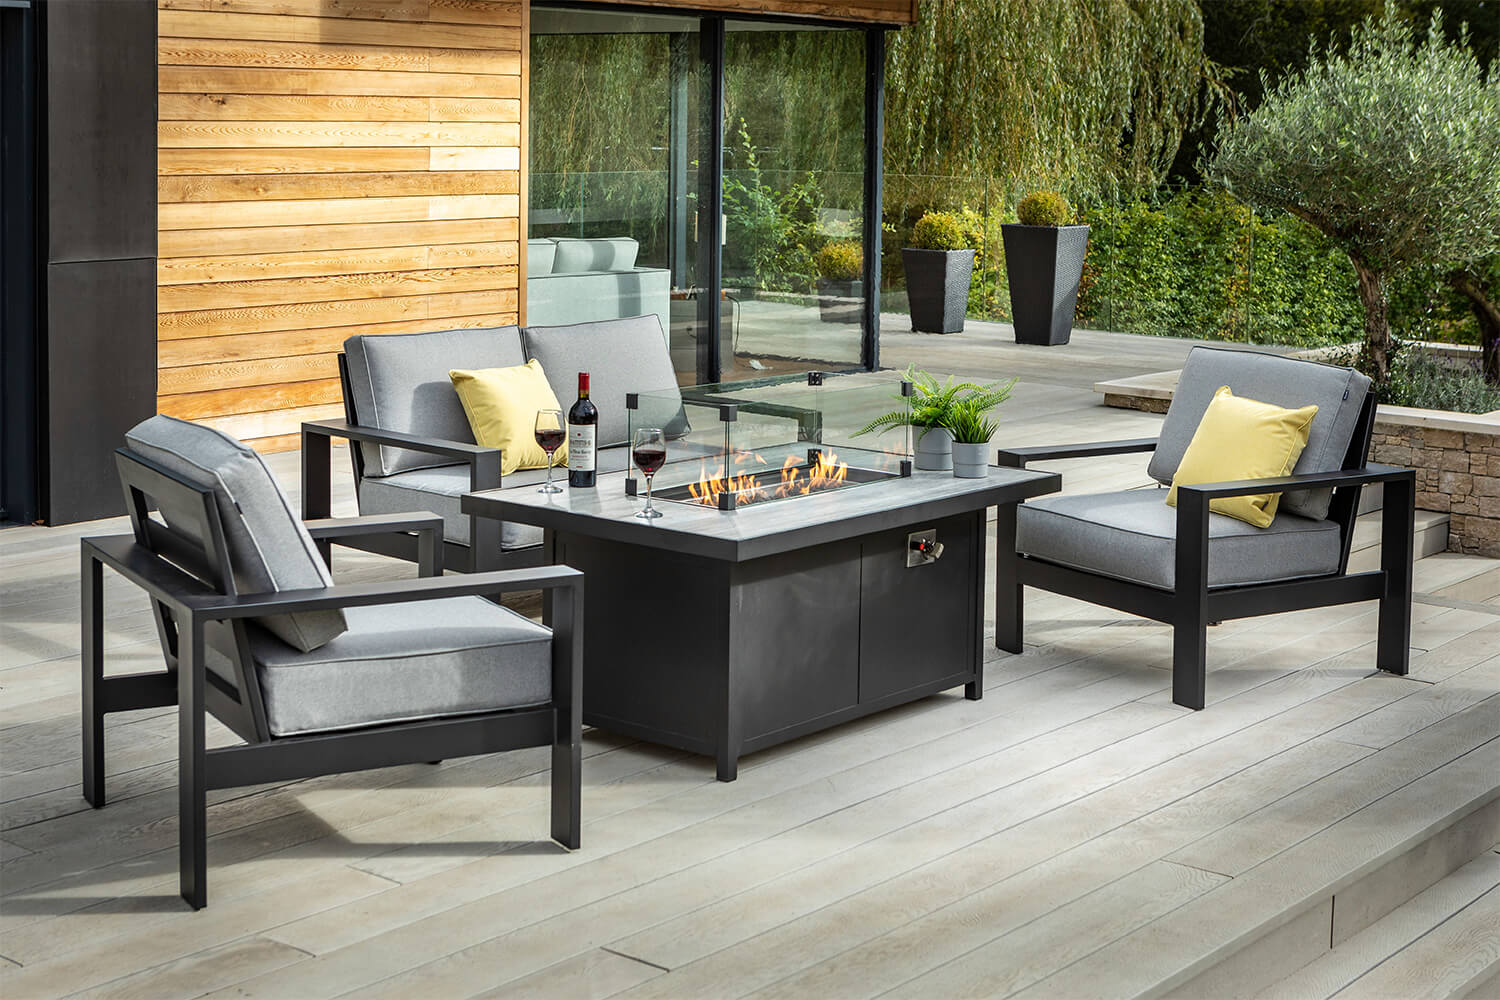 Hartman Atlas 2 Seater Sofa Lounge Set, Outdoor Fire Pit Tables With Chairs